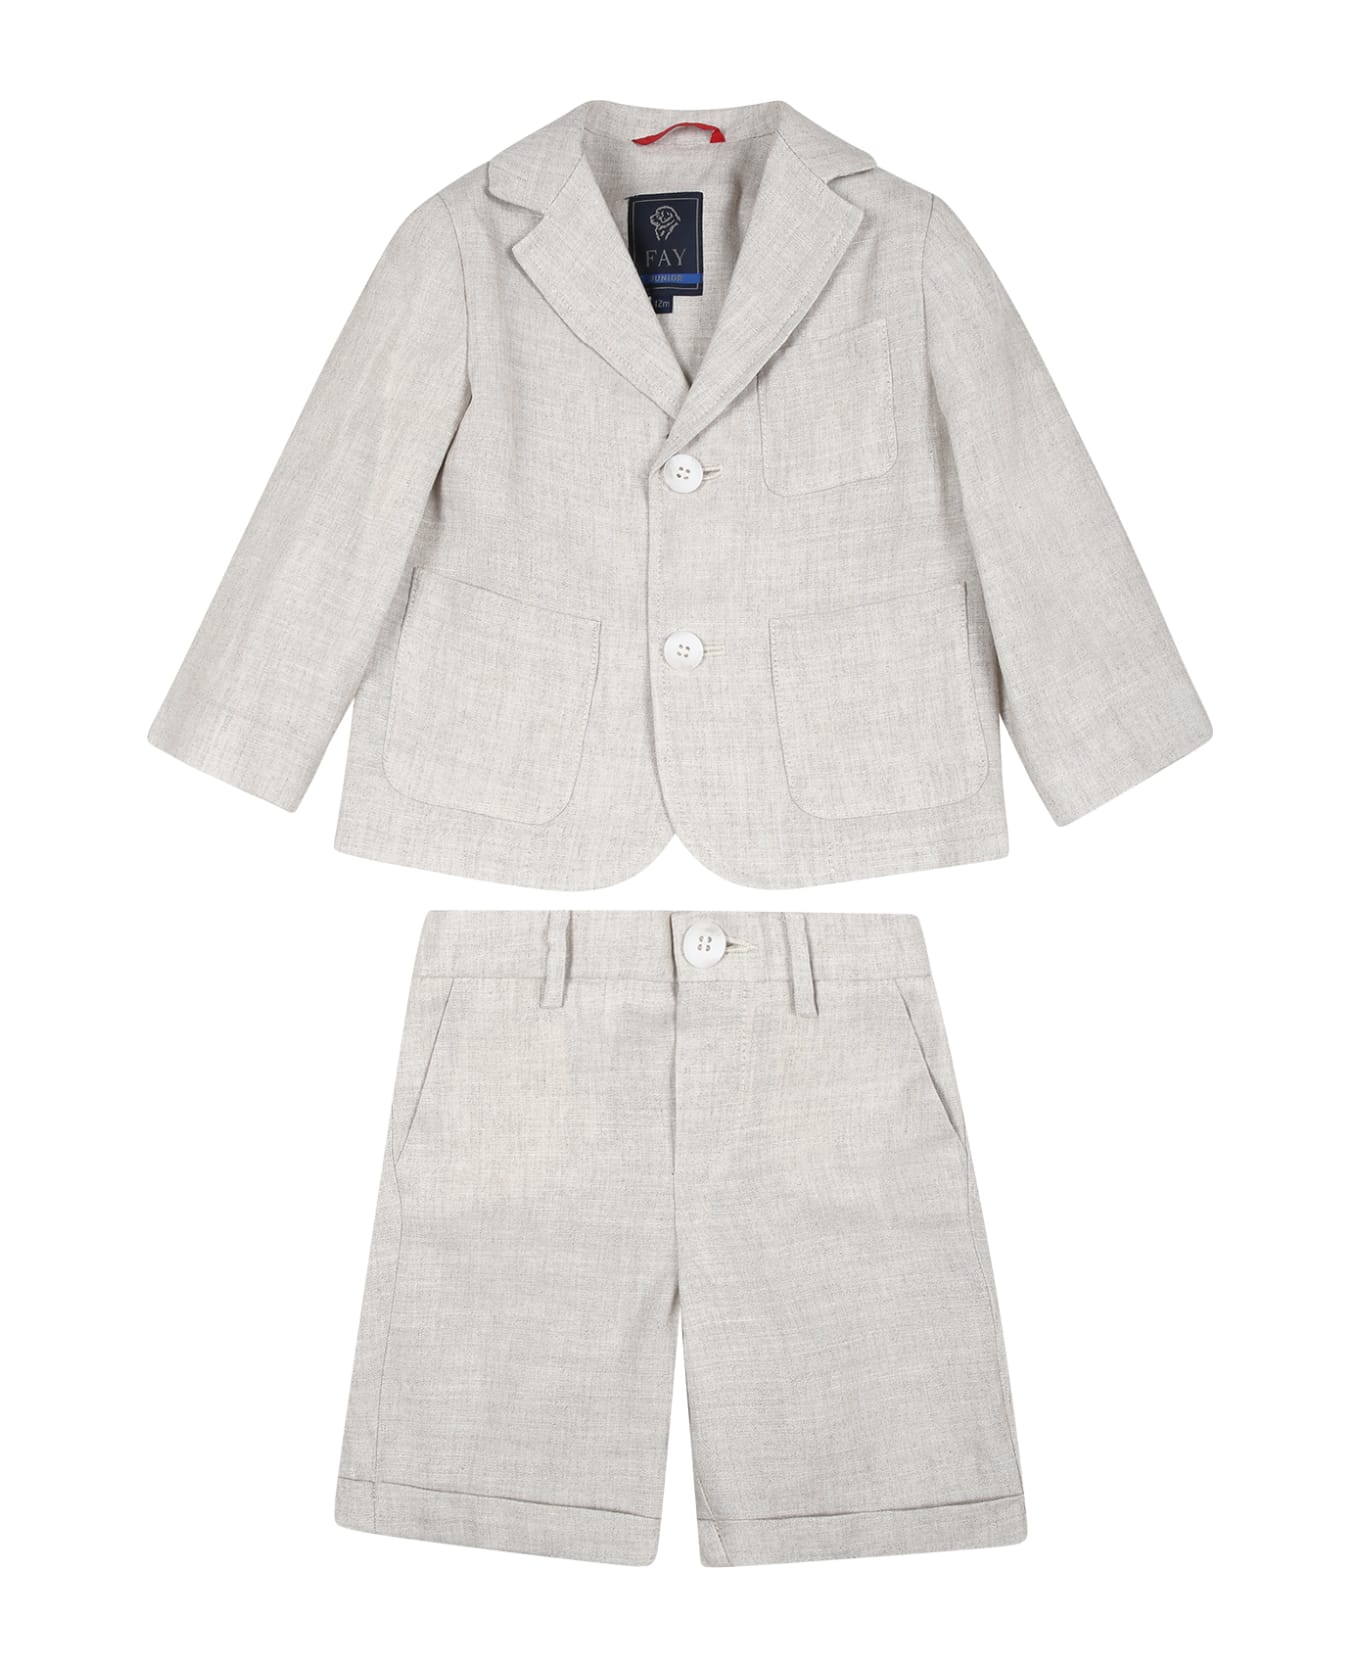 Fay Beige Suit For Baby Boy With Logo - Beige ボディスーツ＆セットアップ